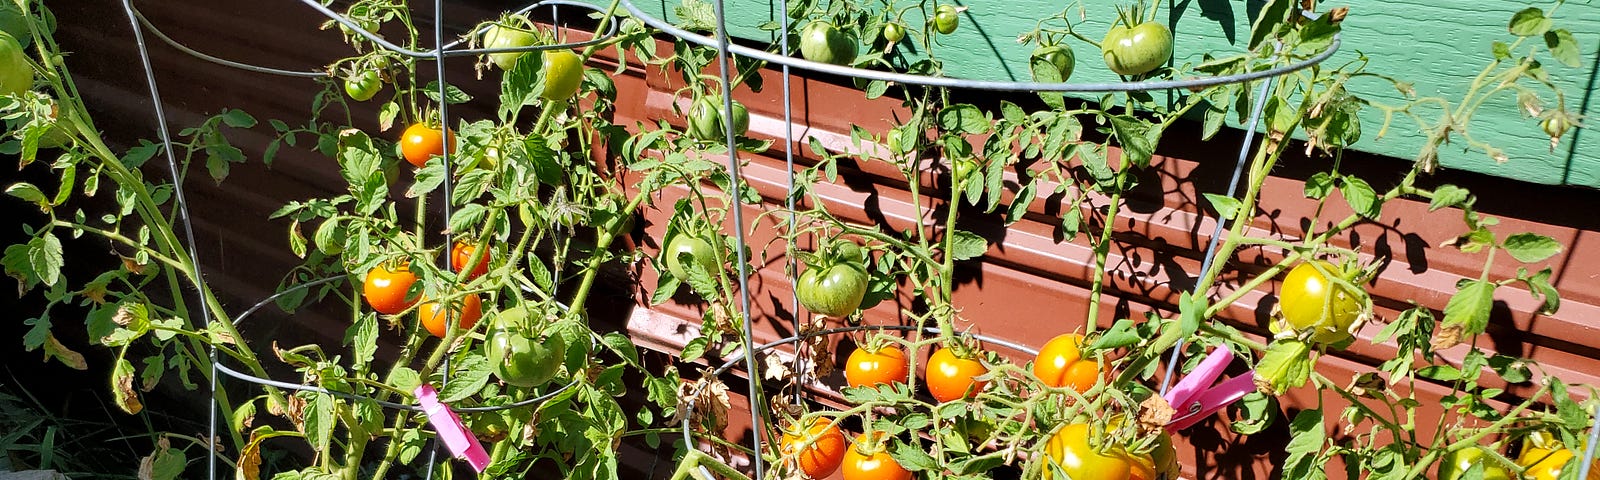 Three tomato plants in tomato cages with ripening tomatos in containers against a mobile home wall painted green and reddish brown. A purple pool noodle runs at the base of the tomatoes through the cages.